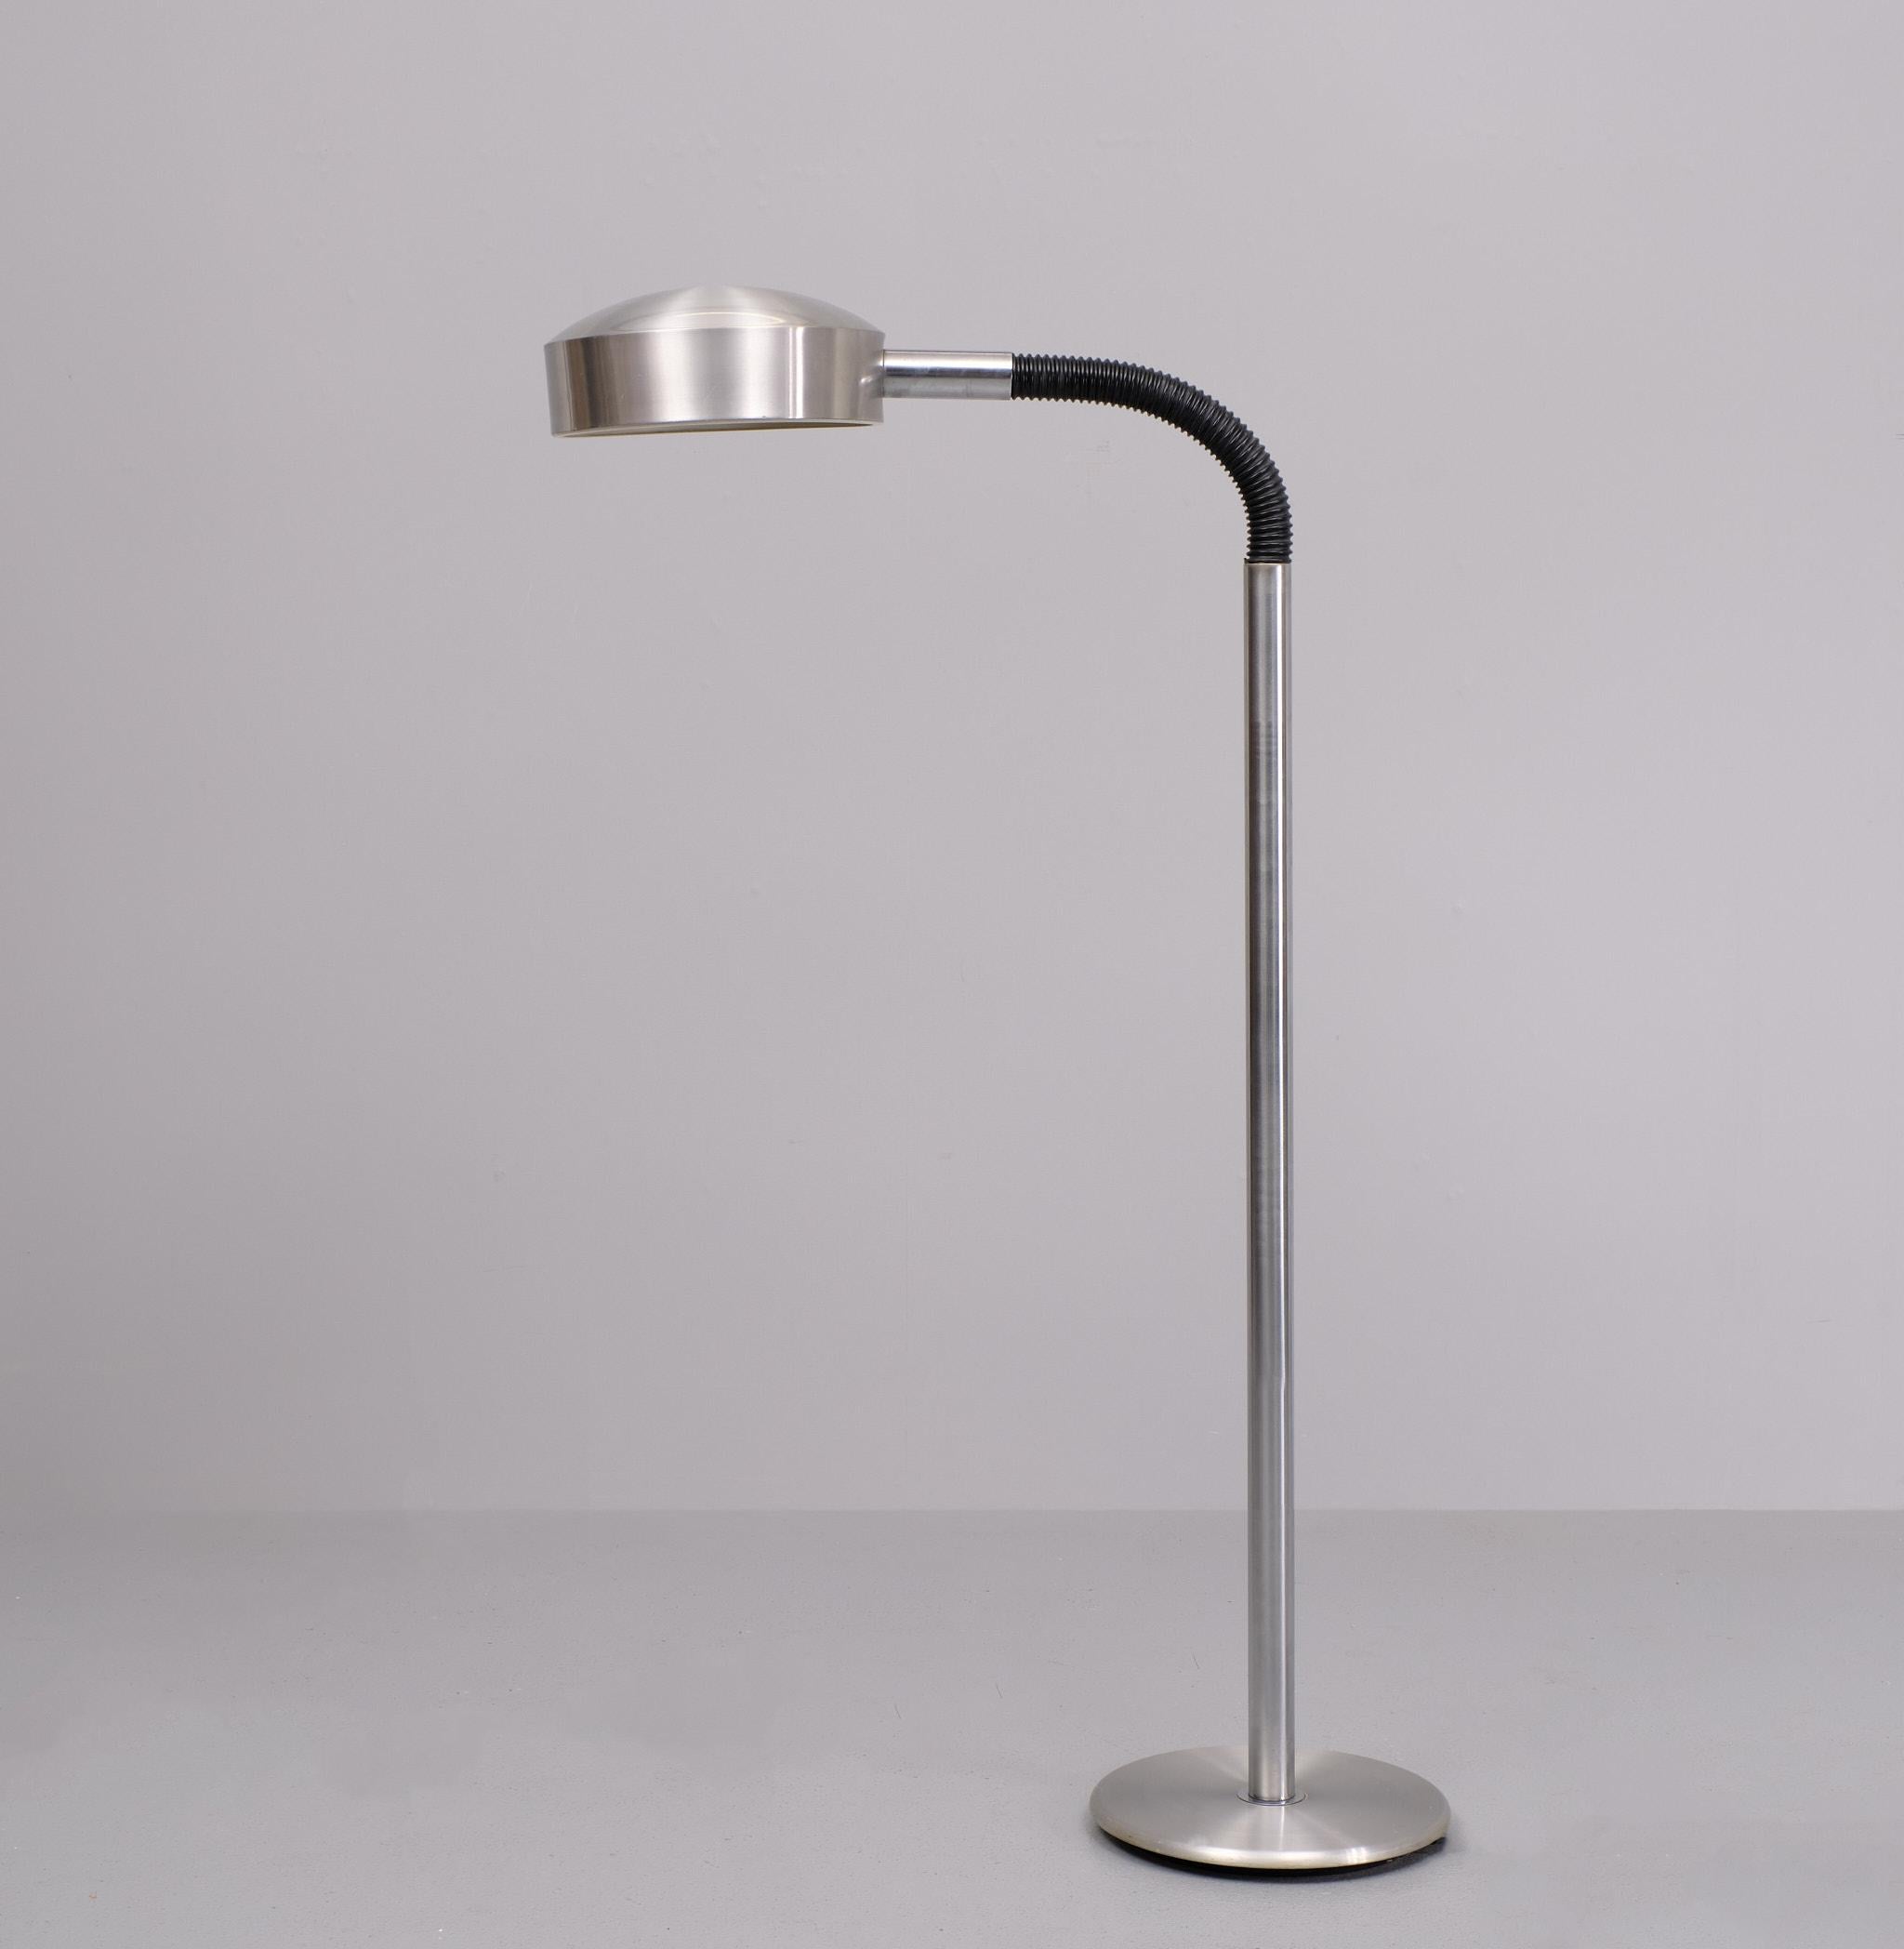 Very nice all Aluminum flexible goose  neck floor lamp .1970s Holland . manufactured  by  Herda  Good condition . Large E27 bulb needed . foot switch .
